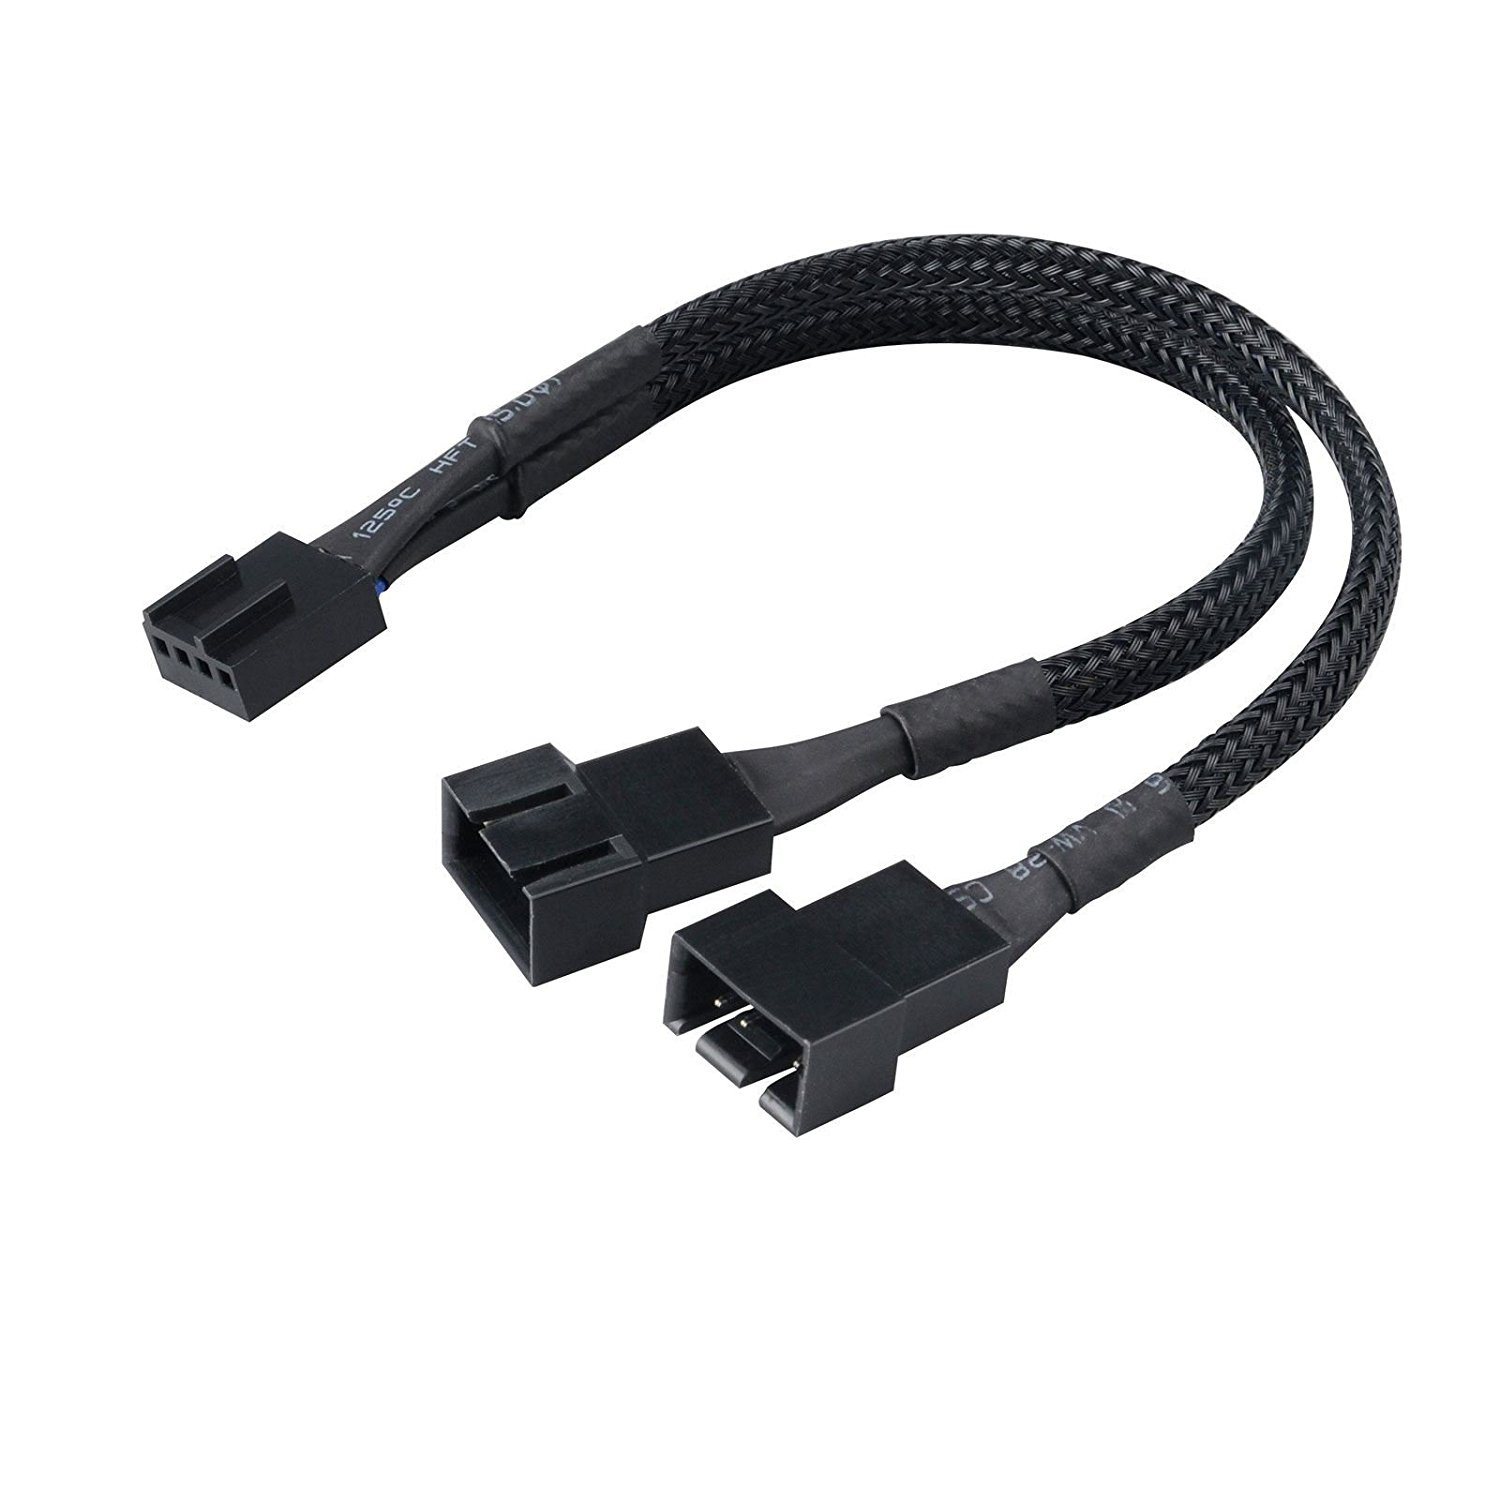  25cm 1 to 2 Fan Splitter Cable 3-Pin/ 4-Pin PWM - Braided Black  